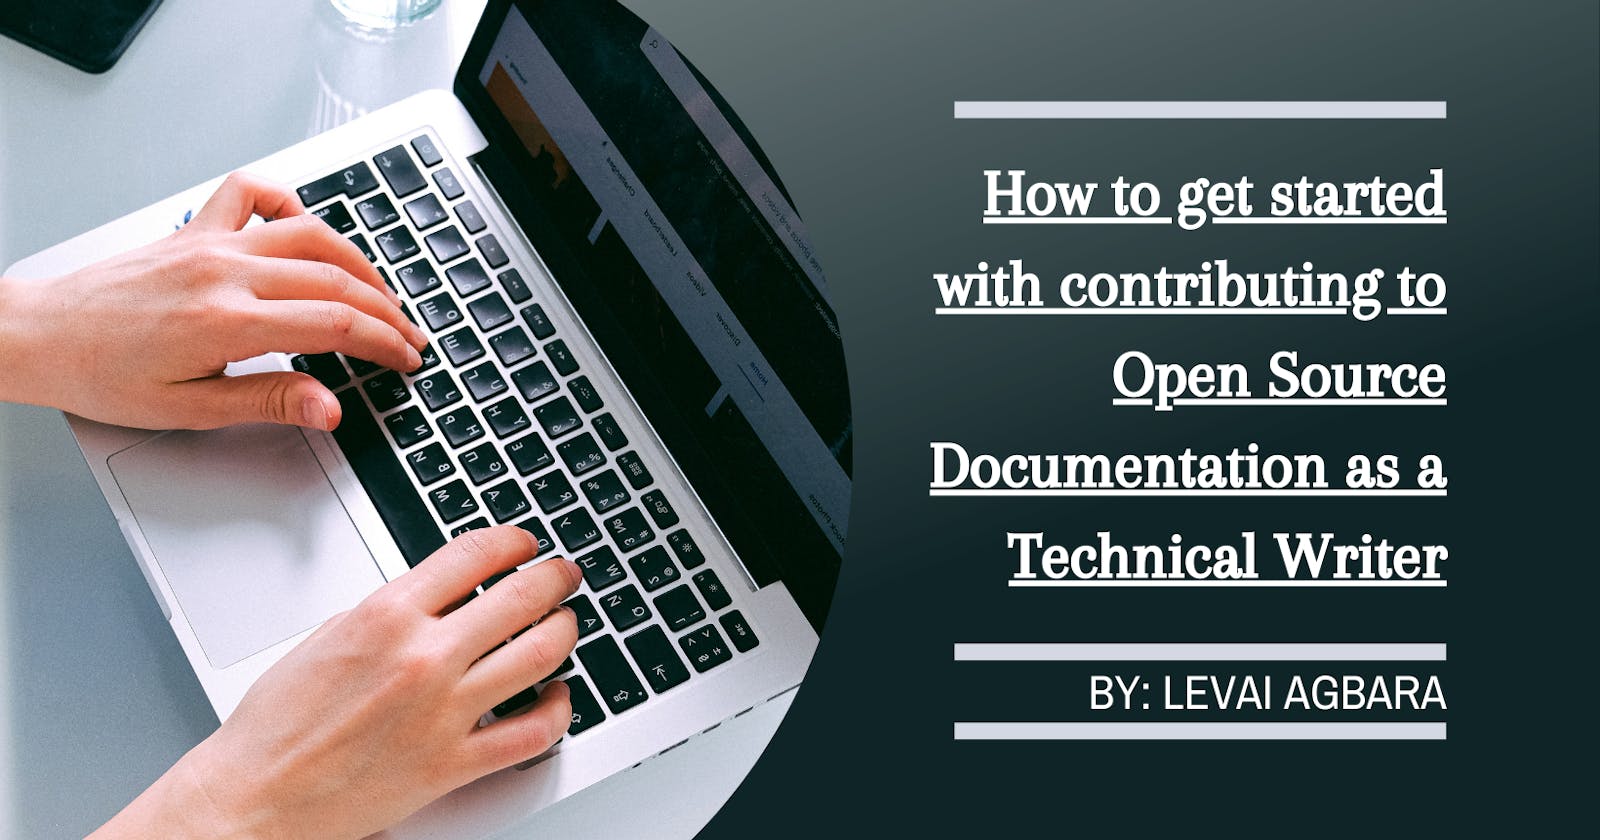 How to get started with contributing to Open Source Documentation as a Technical Writer